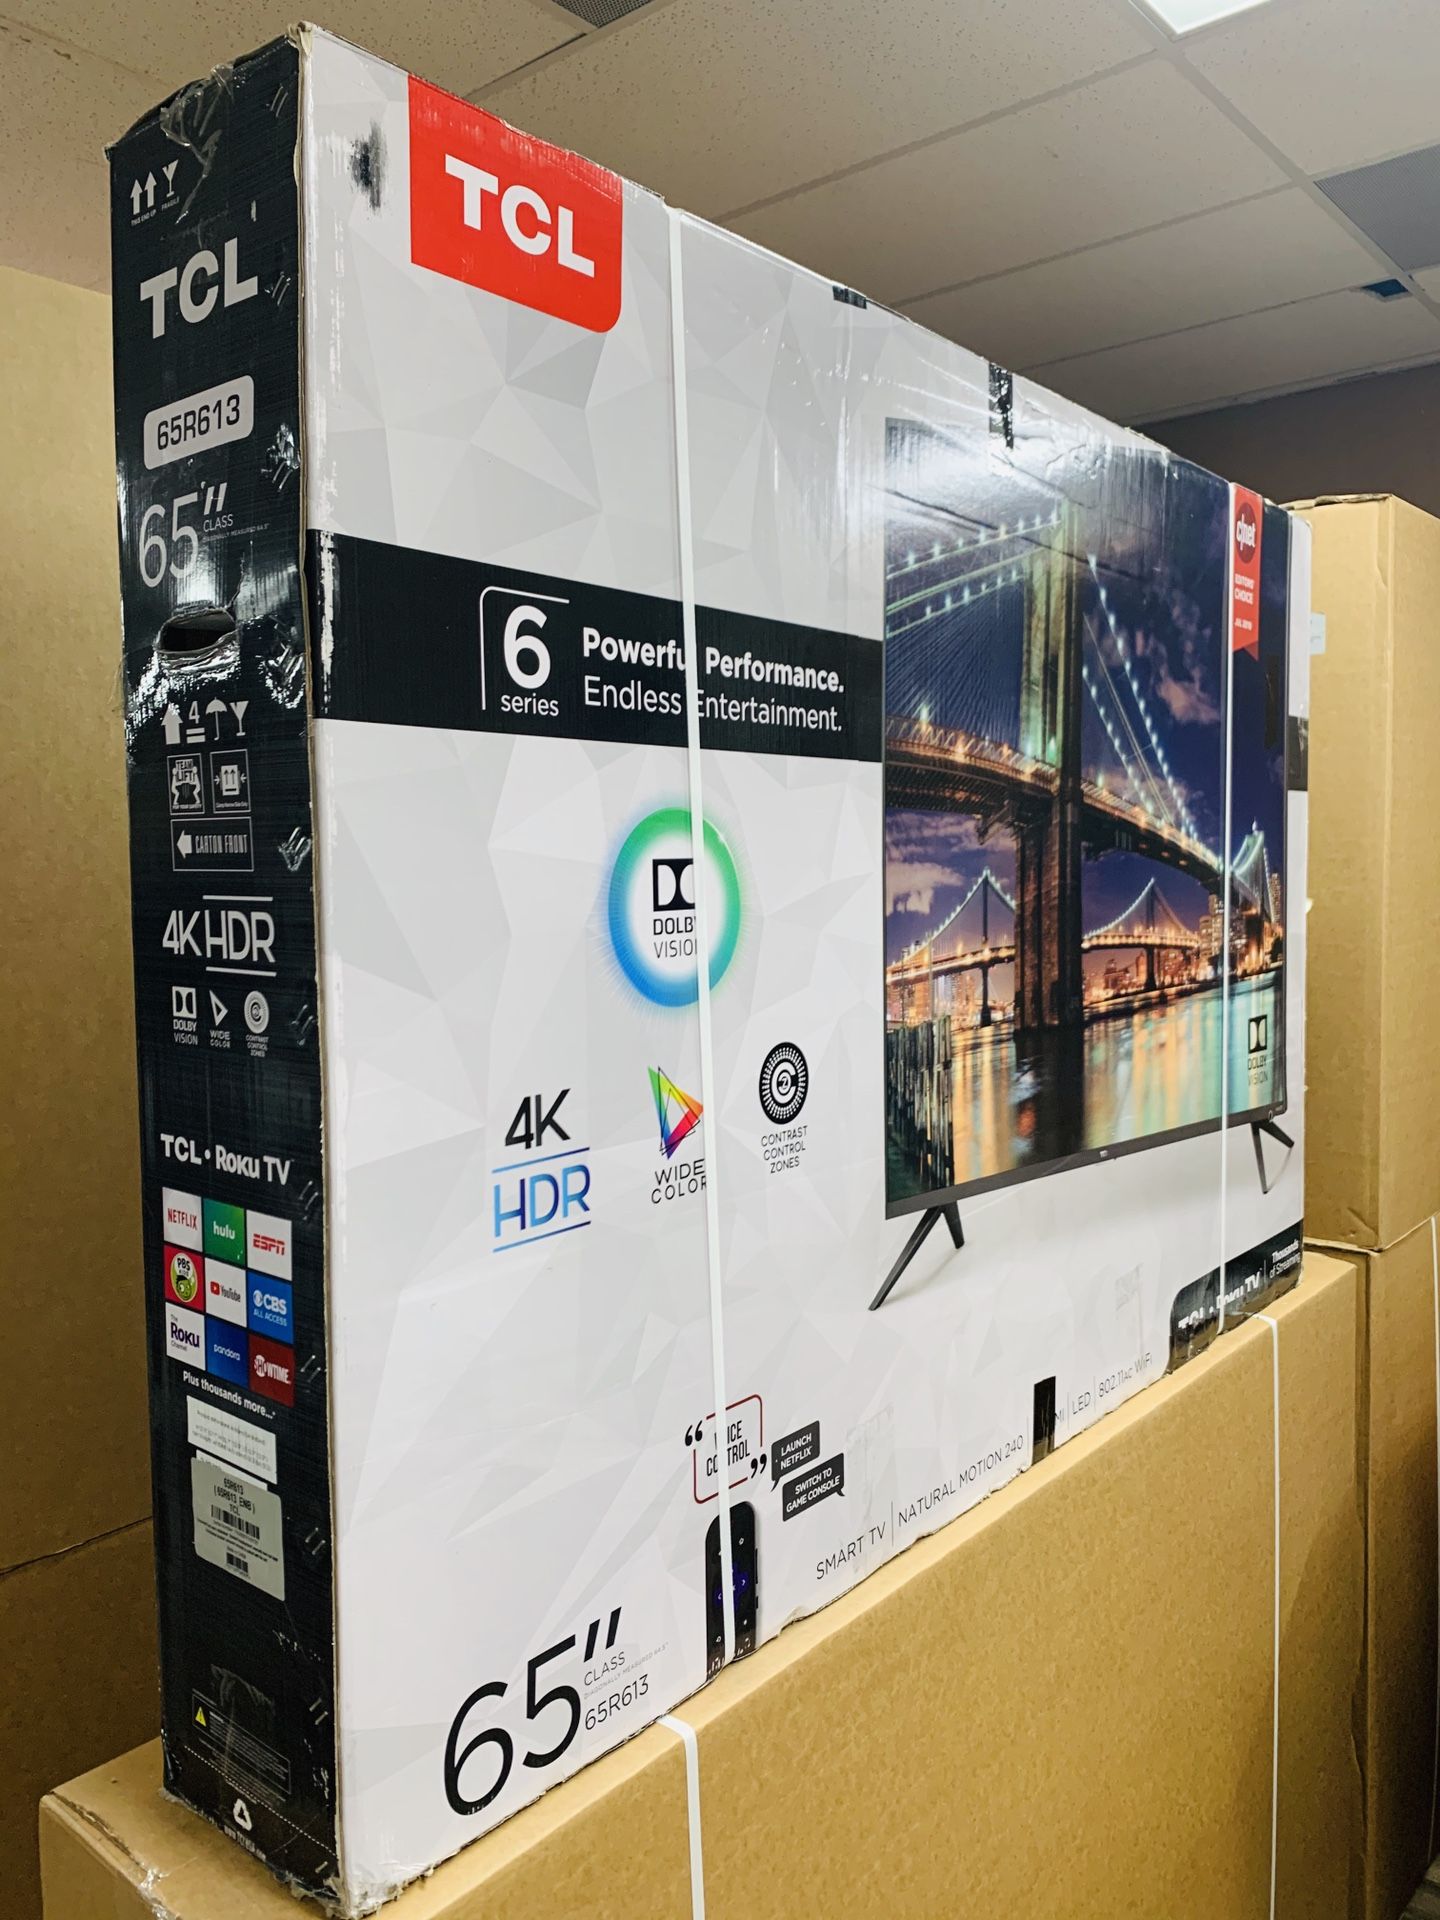 BEAUTIFUL 65" TCL 4K SMART ROKU TV 6 SERIES WITH CONTRAST CONTROL ZONES- INCLUDES WARRANTY WITH PURCHASE!